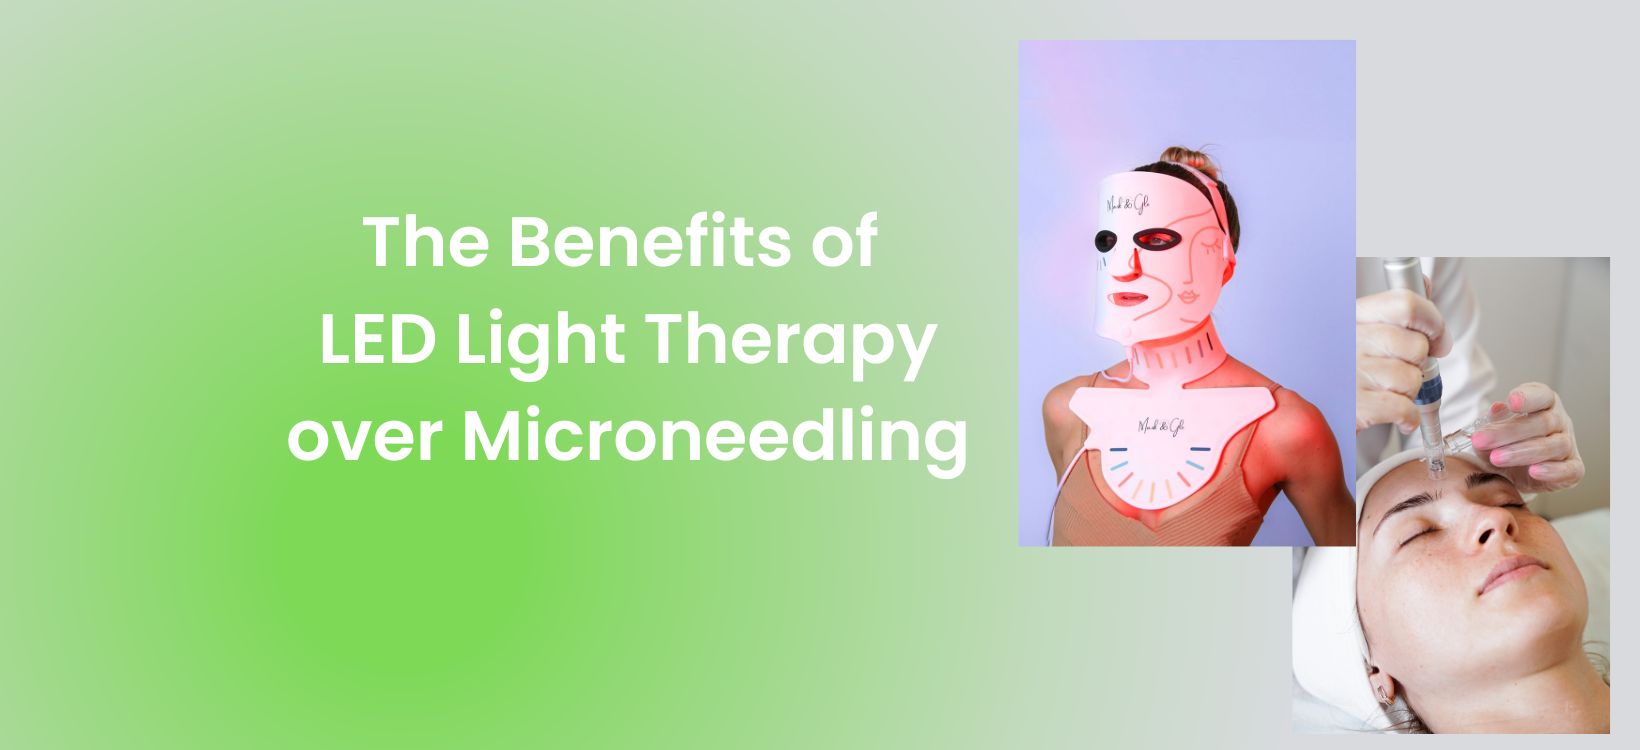 The Benefits of LED Light Therapy over Microneedling – LED Esthetics